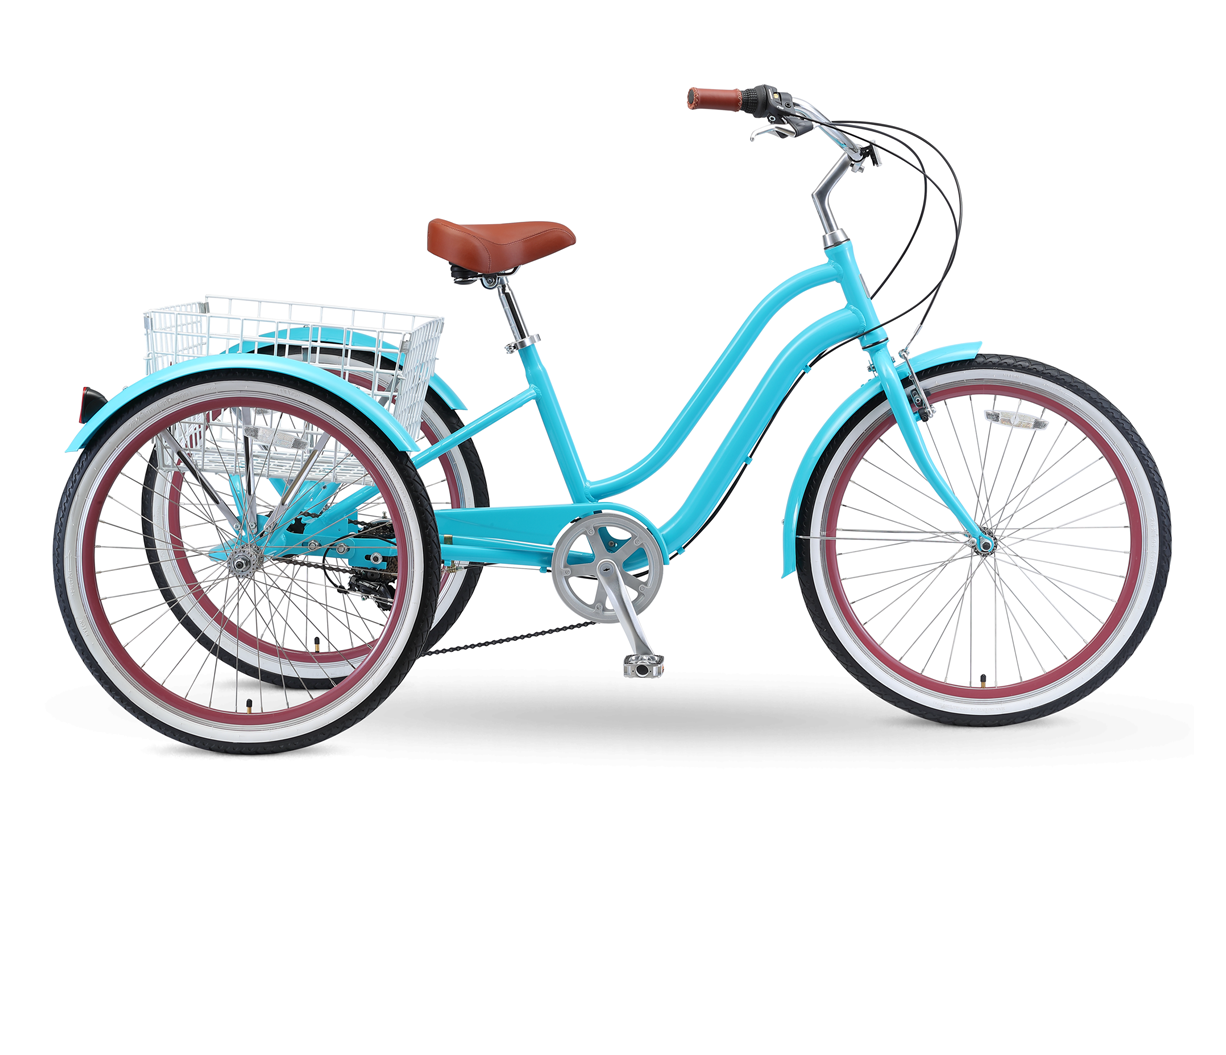 tourism city used ladies and kids favourite womens 3 wheeler bike tricycle bike for sale - buy ladies tricycle bikewomens tricycle for sale3 wheeler bike tricycle product on alibabacom on women's tricycle for sale